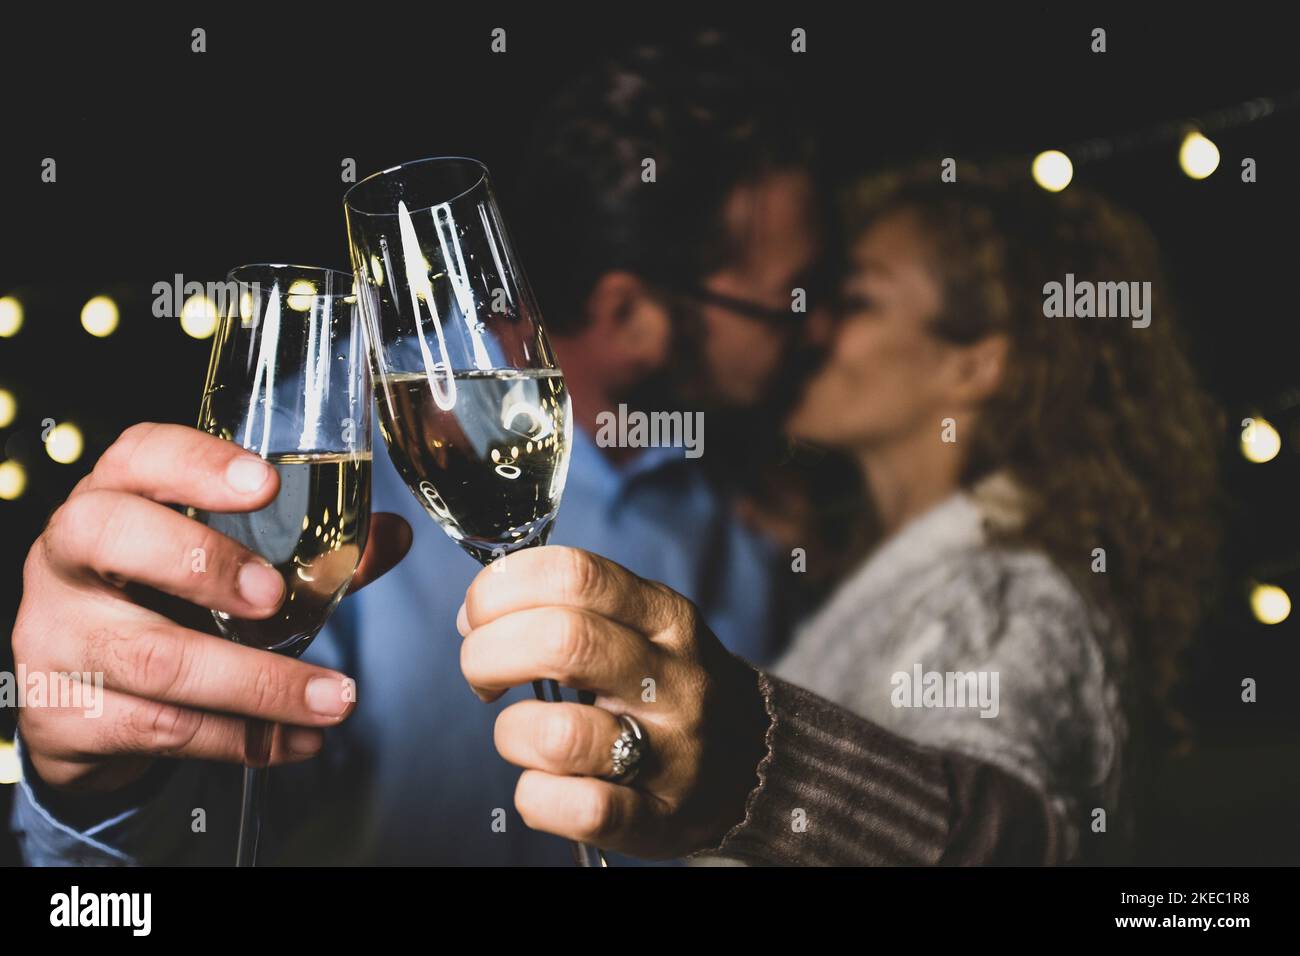 Affectionate caucasian couple kissing each other while toasting champagne glasses celebrating new year party. Loving husband and wife kissing each other while partying with white wine glasses in hands Stock Photo